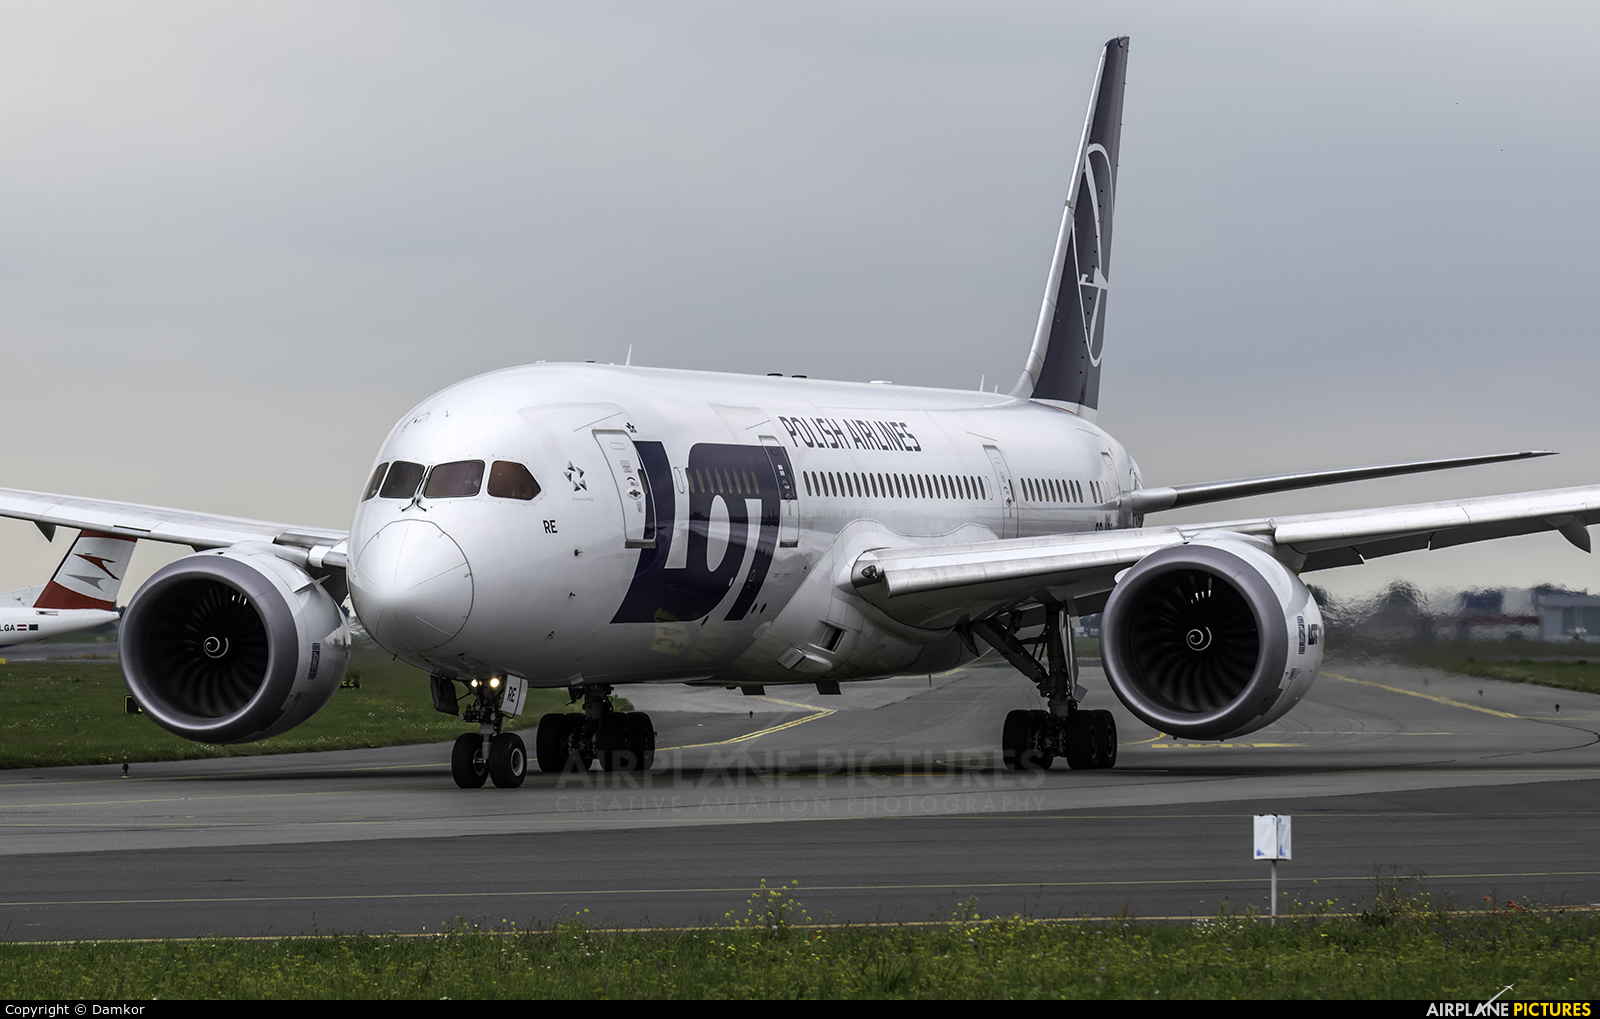 LOT - Polish Airlines SP-LRE aircraft at Warsaw - Frederic Chopin